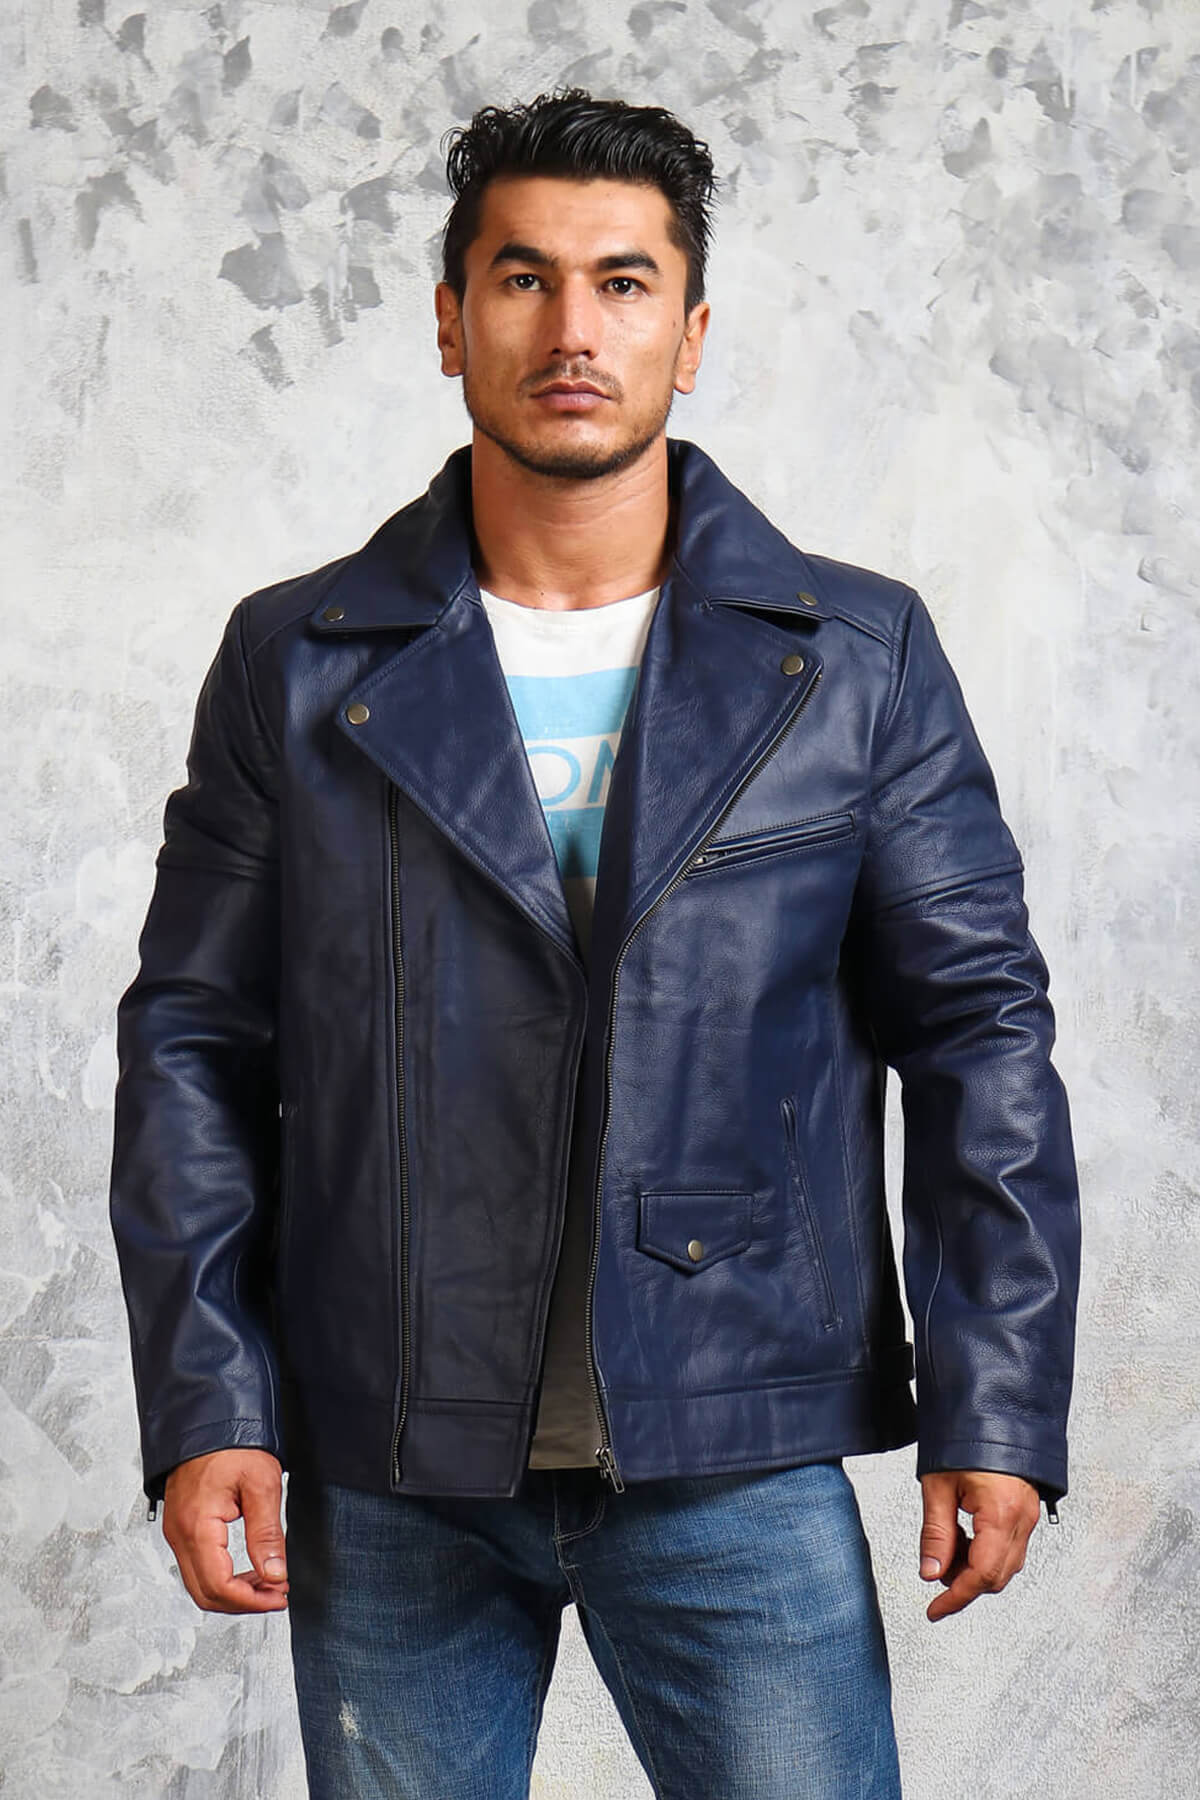 Blue Motorcycle Jacket in Real Leather - Men's Blue Leather Jacket